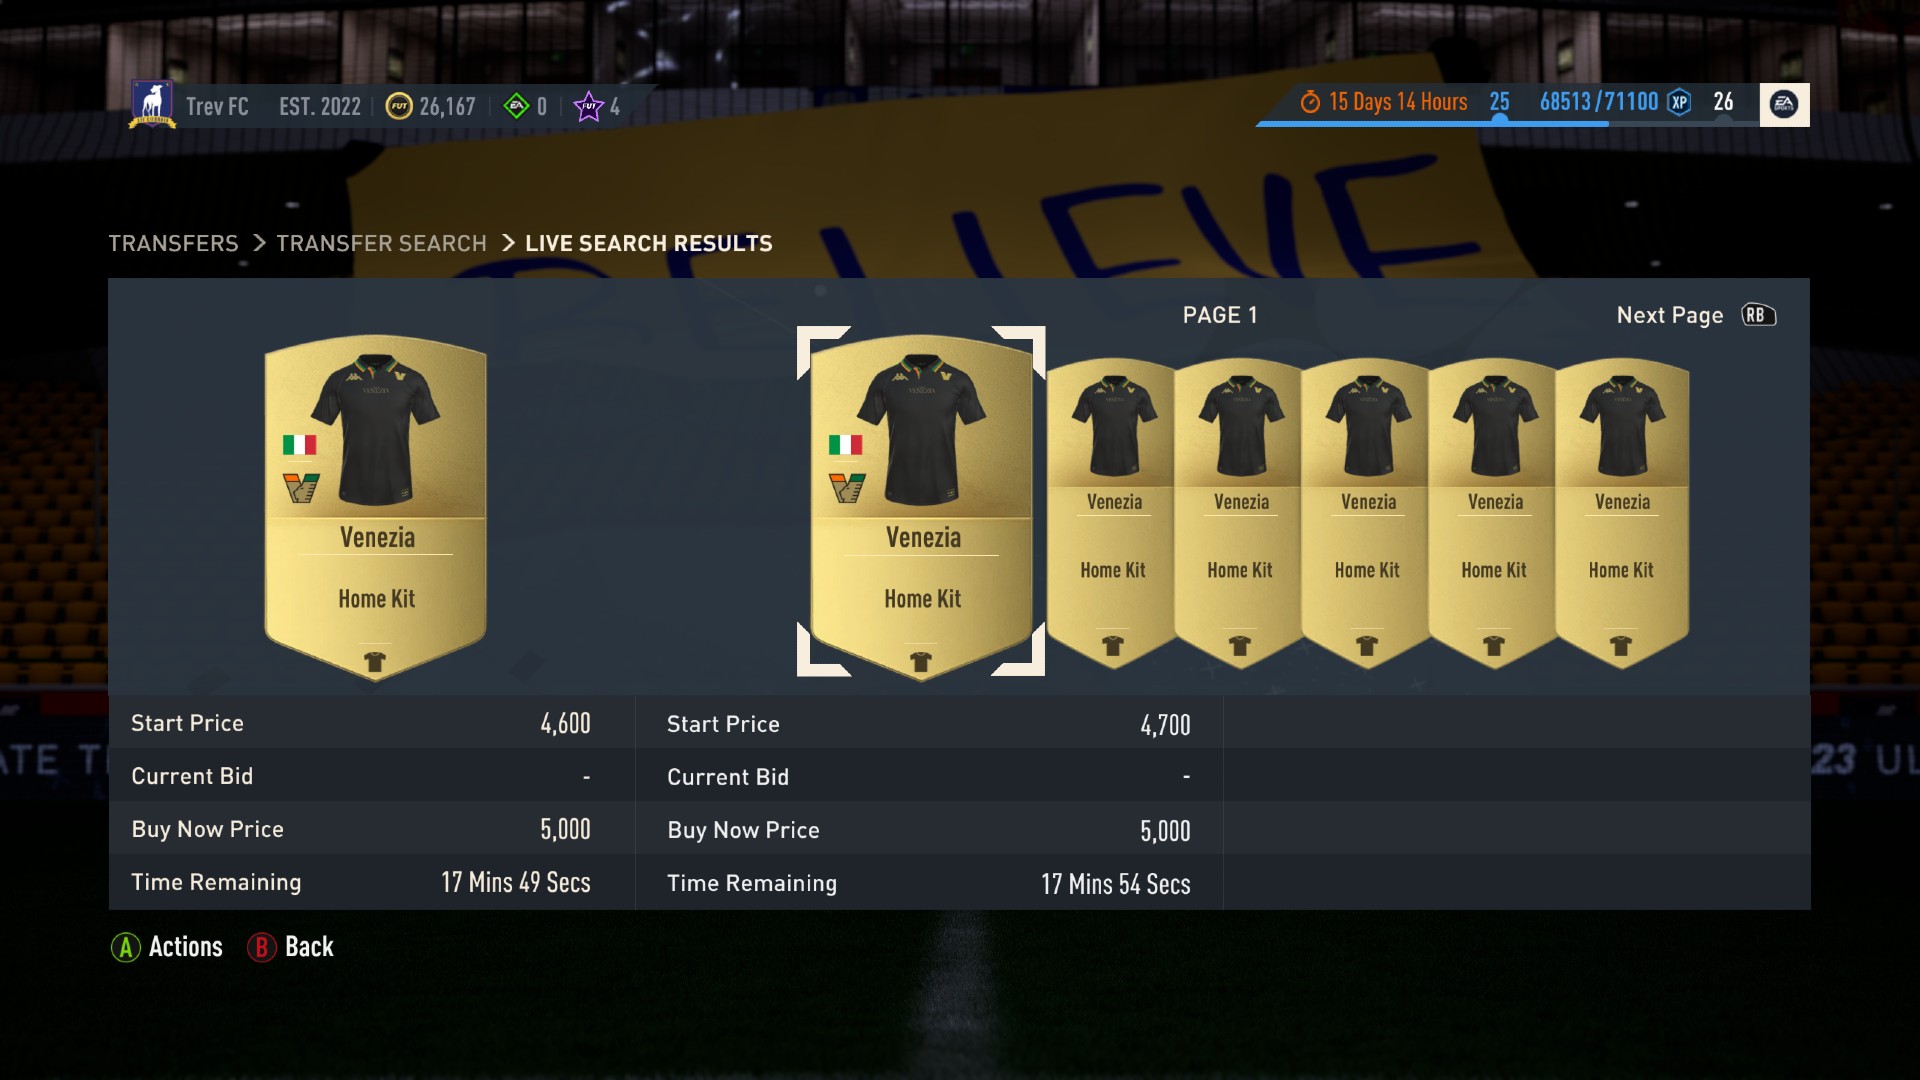 The Best FUT Kits In FIFA 23 And Their Prices